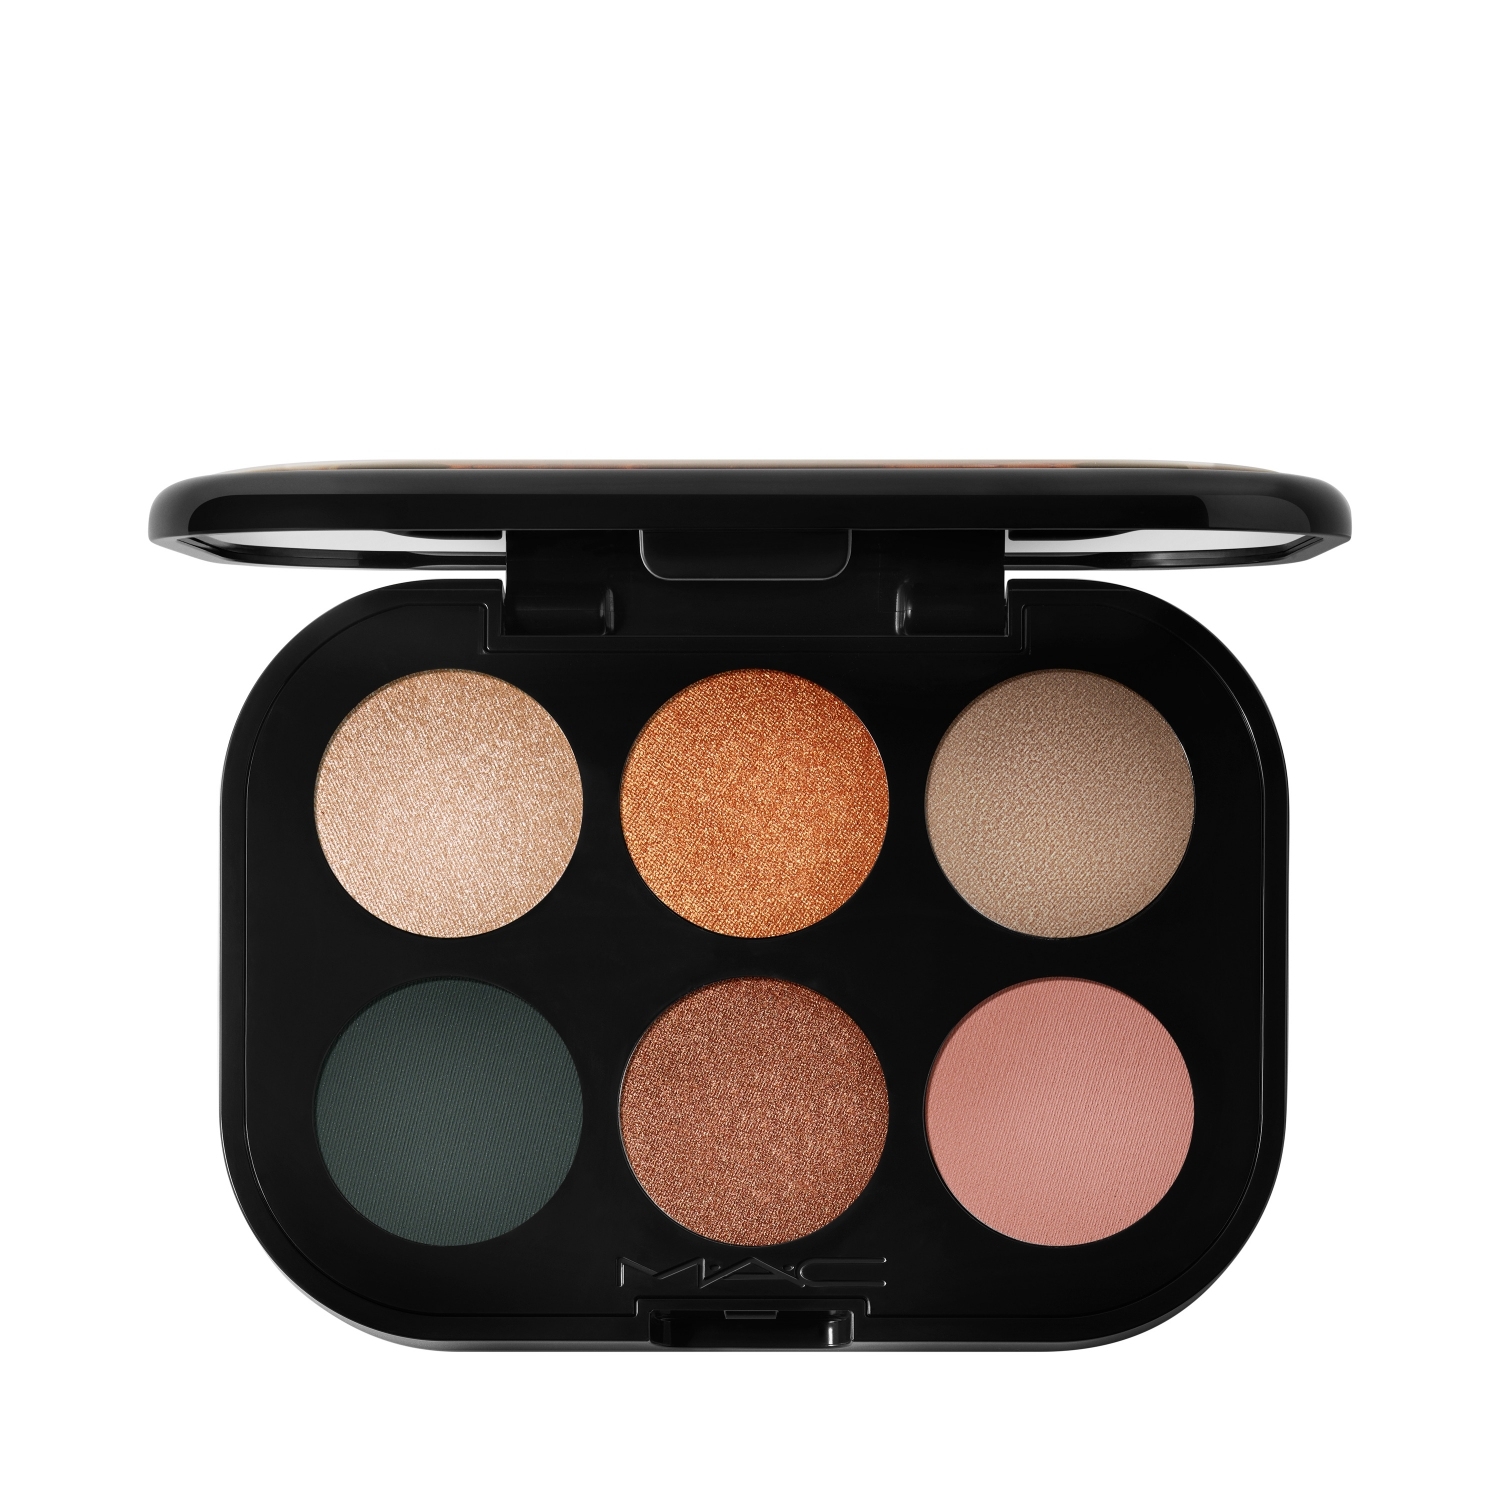 M.A.C | M.A.C Connect In Colour X6 Eye Shadow Palette - Bronze Influence (8.28g)